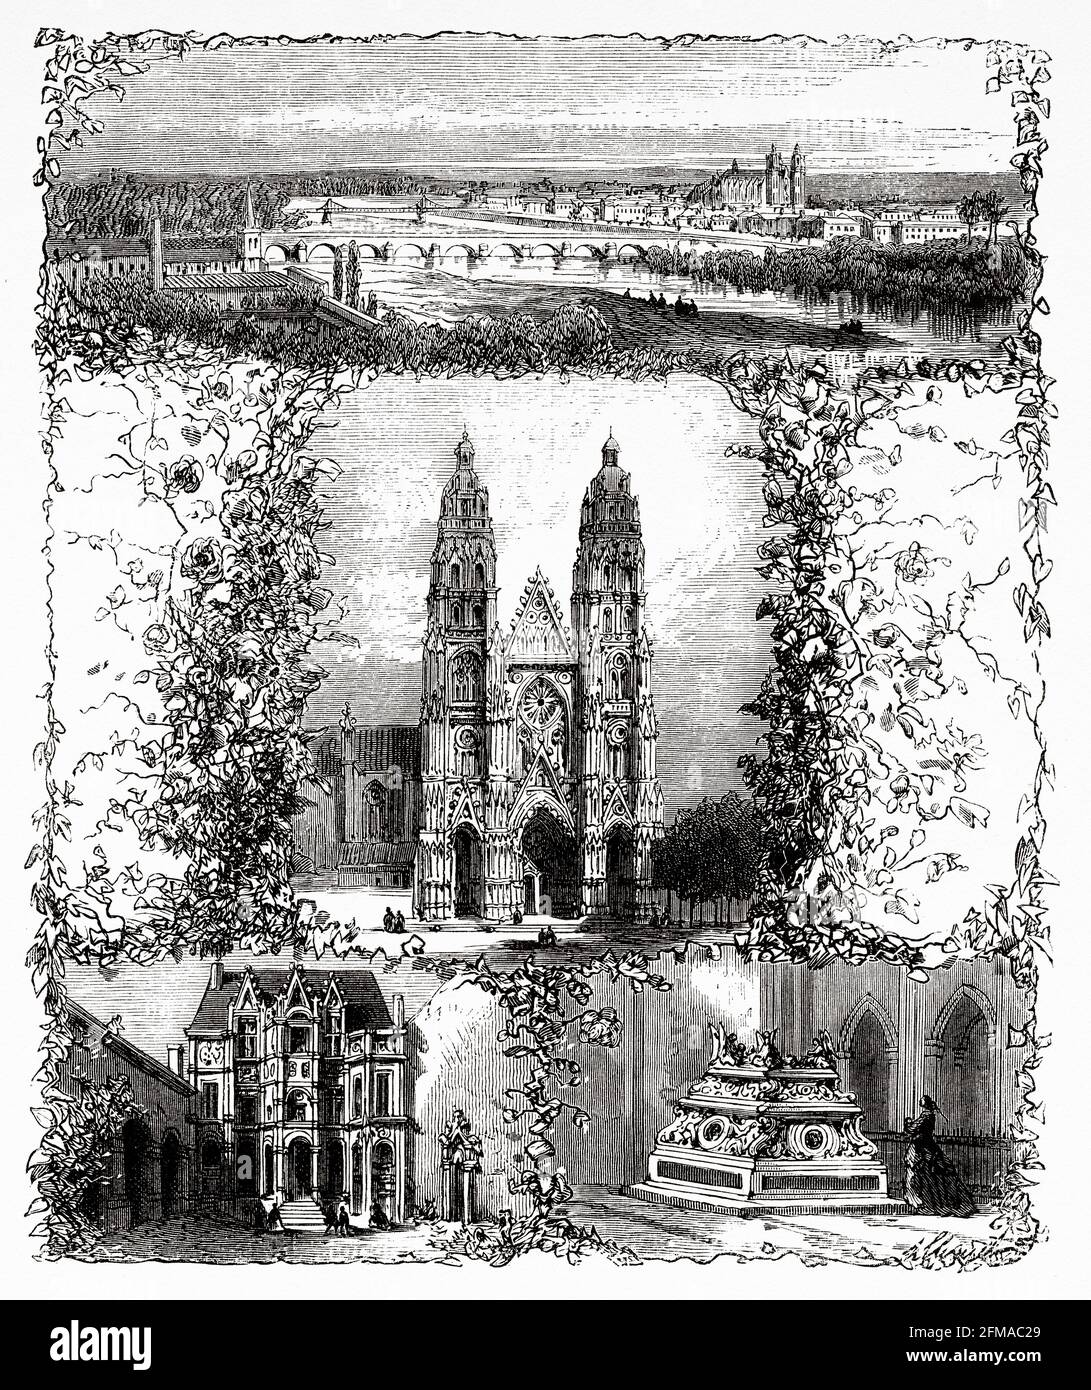 Old engraving with a general panoramic view of the city of Tours, Cathedral of Saint Gatien, Hotel Gouin, The tomb of the children of Charles VIII in the cathedral of Tours.  Tours, Indre-et-Loire, Loire valley, Centre, France. Old 19th century engraved illustration from Histoire de la Revolution Francaise 1876 by Jules Michelet (1798-1874) Stock Photo